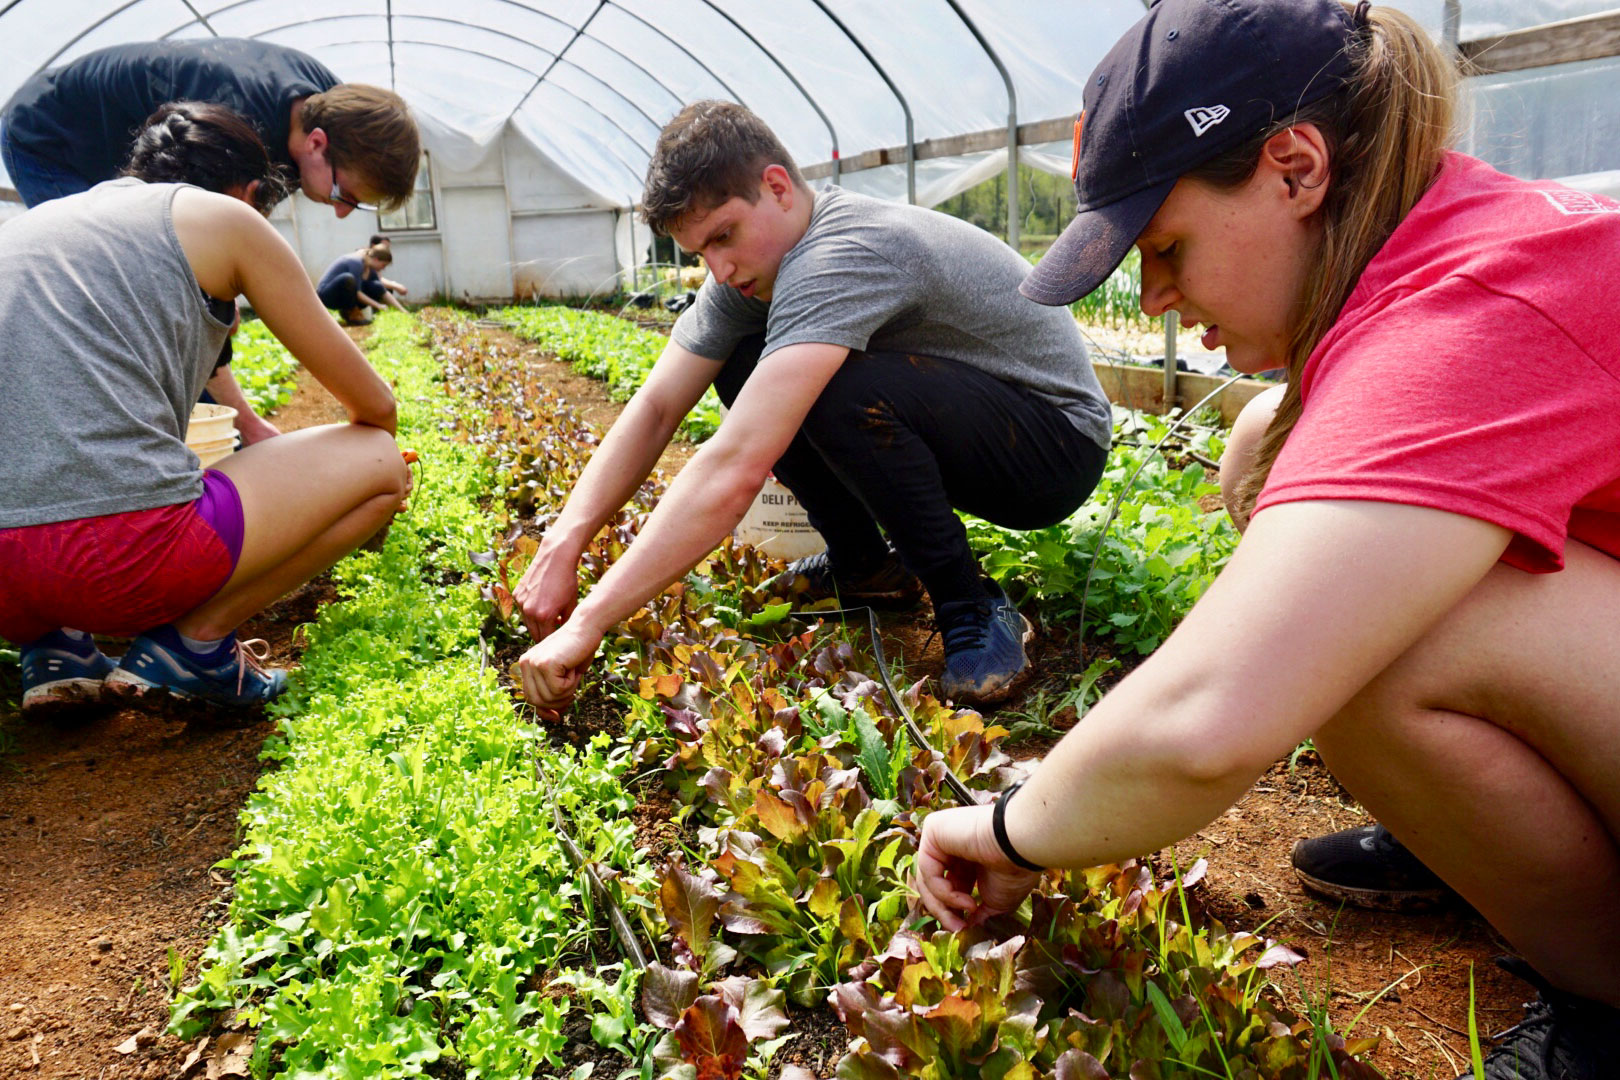 Students volunteered at Morven Farm, doing a variety of tasks in the educational garden that currently serves as a local food systems laboratory for students and faculty. 